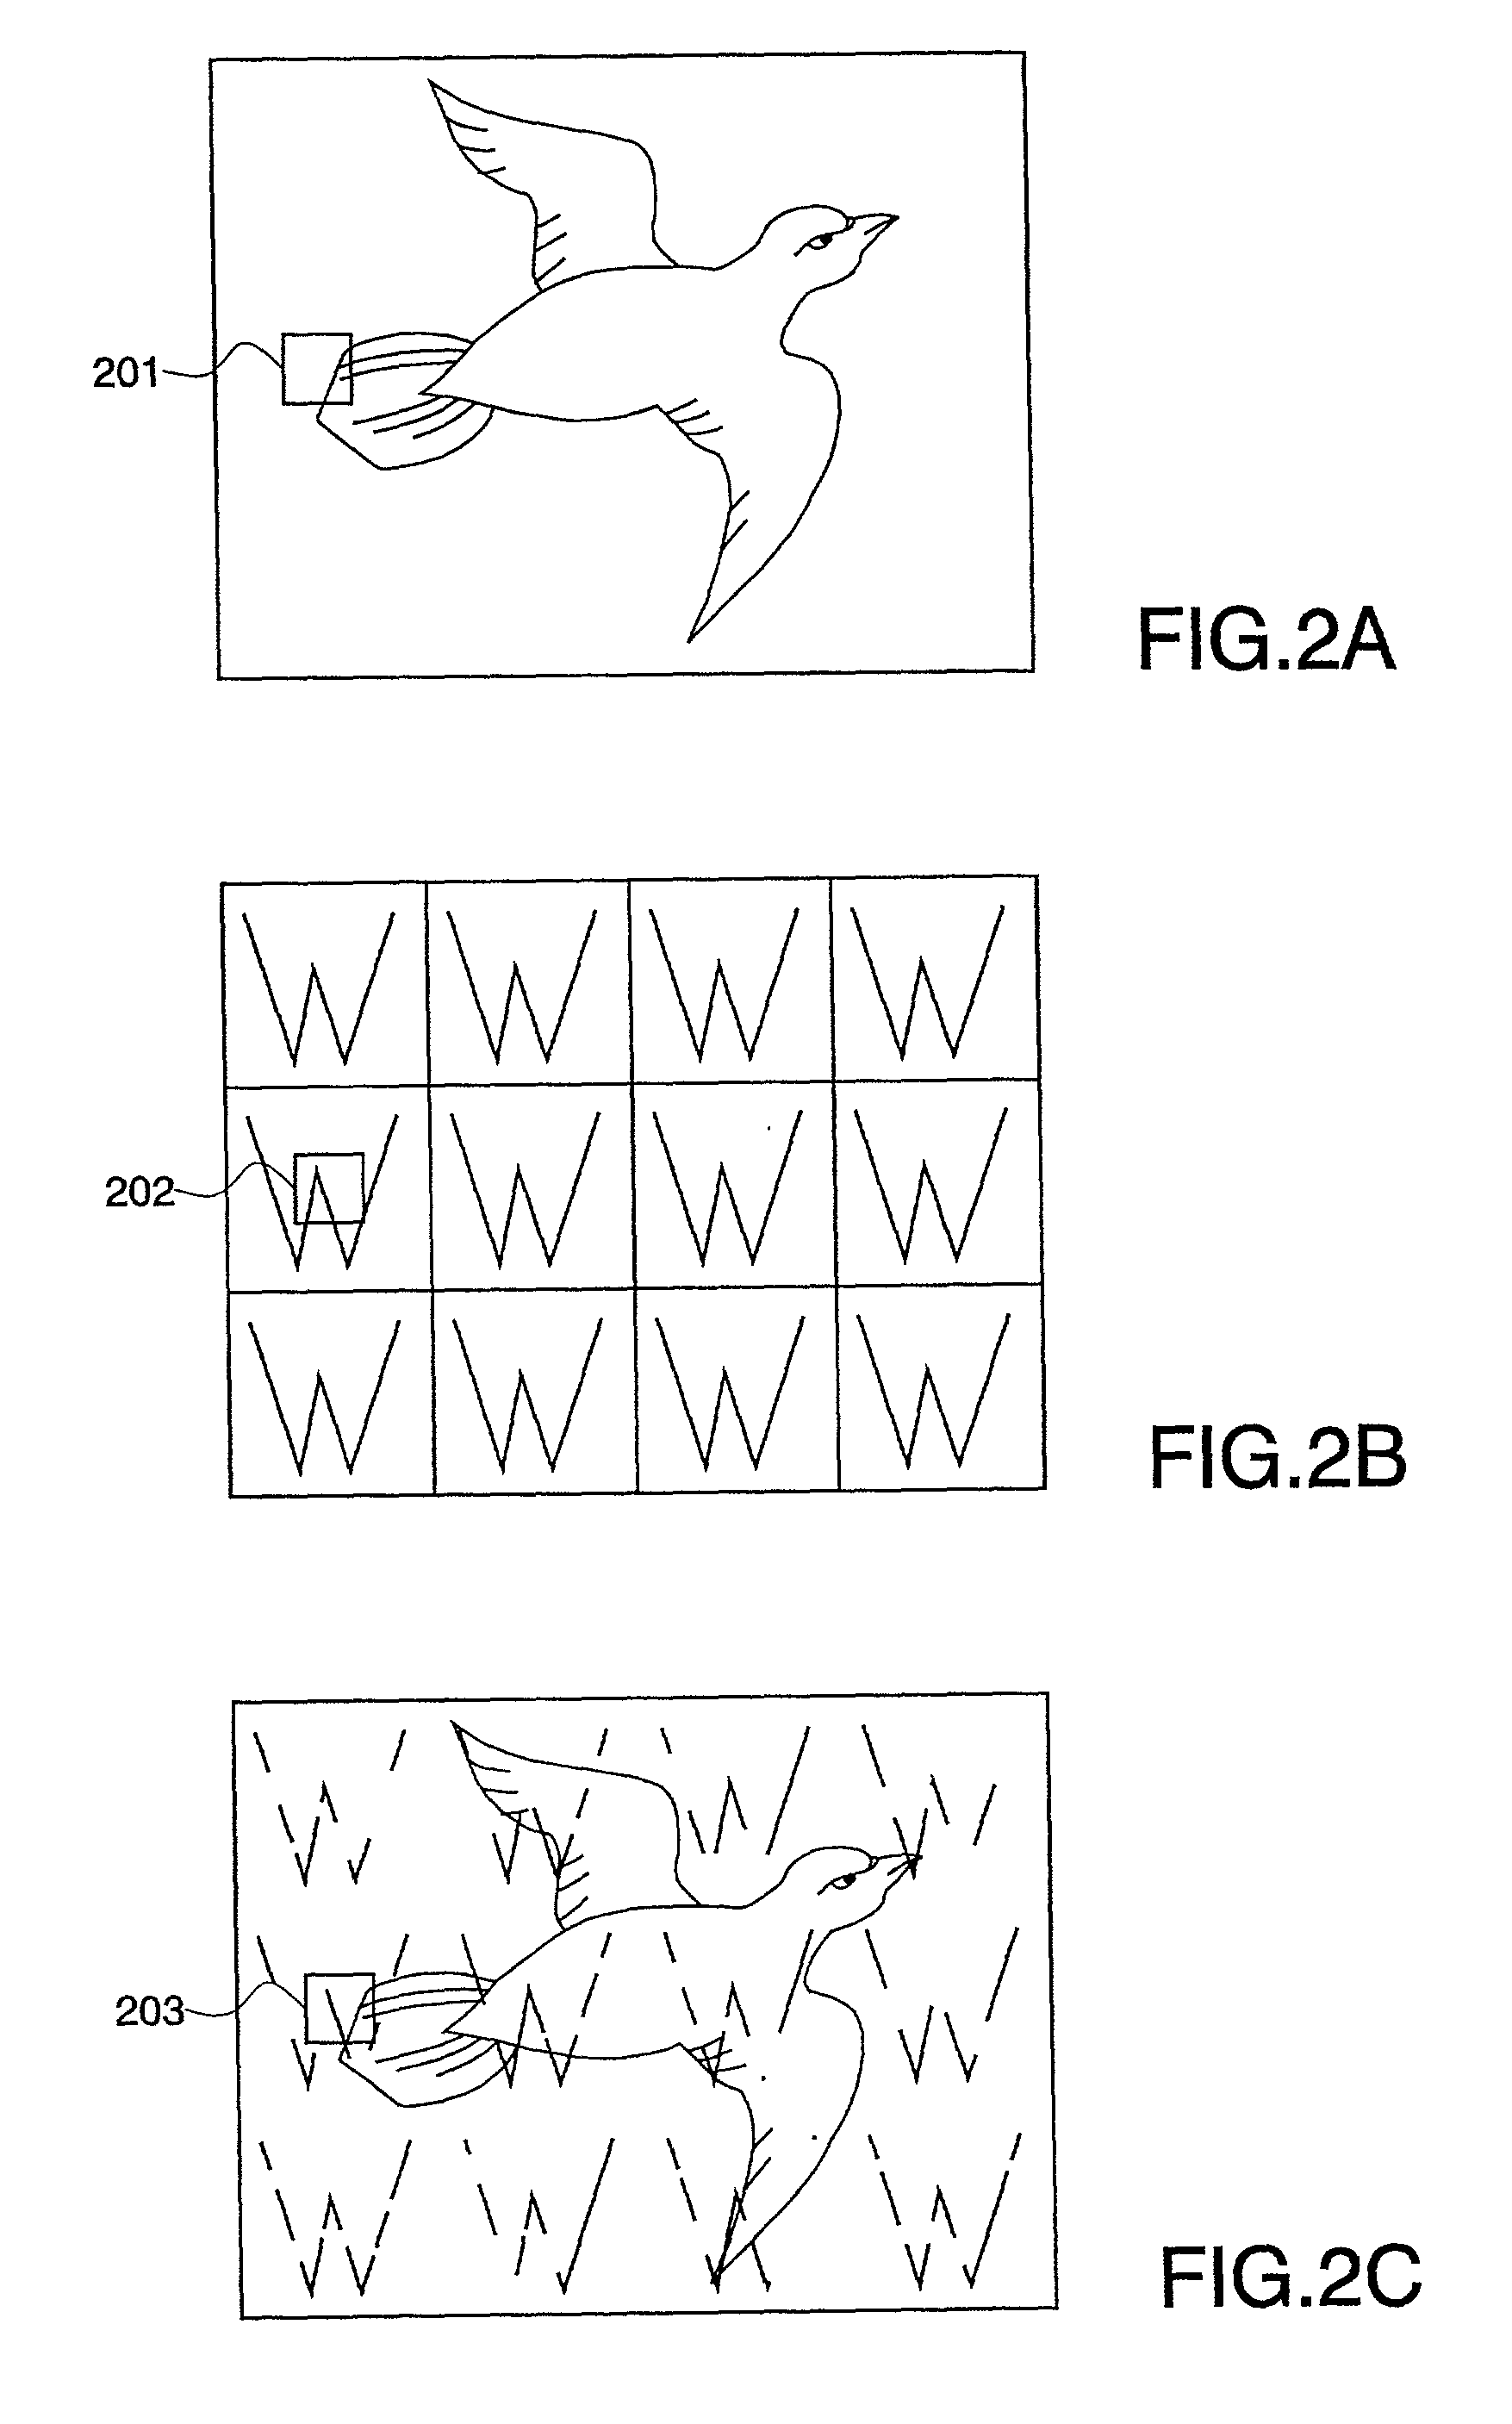 Watermarking a compressed information signal